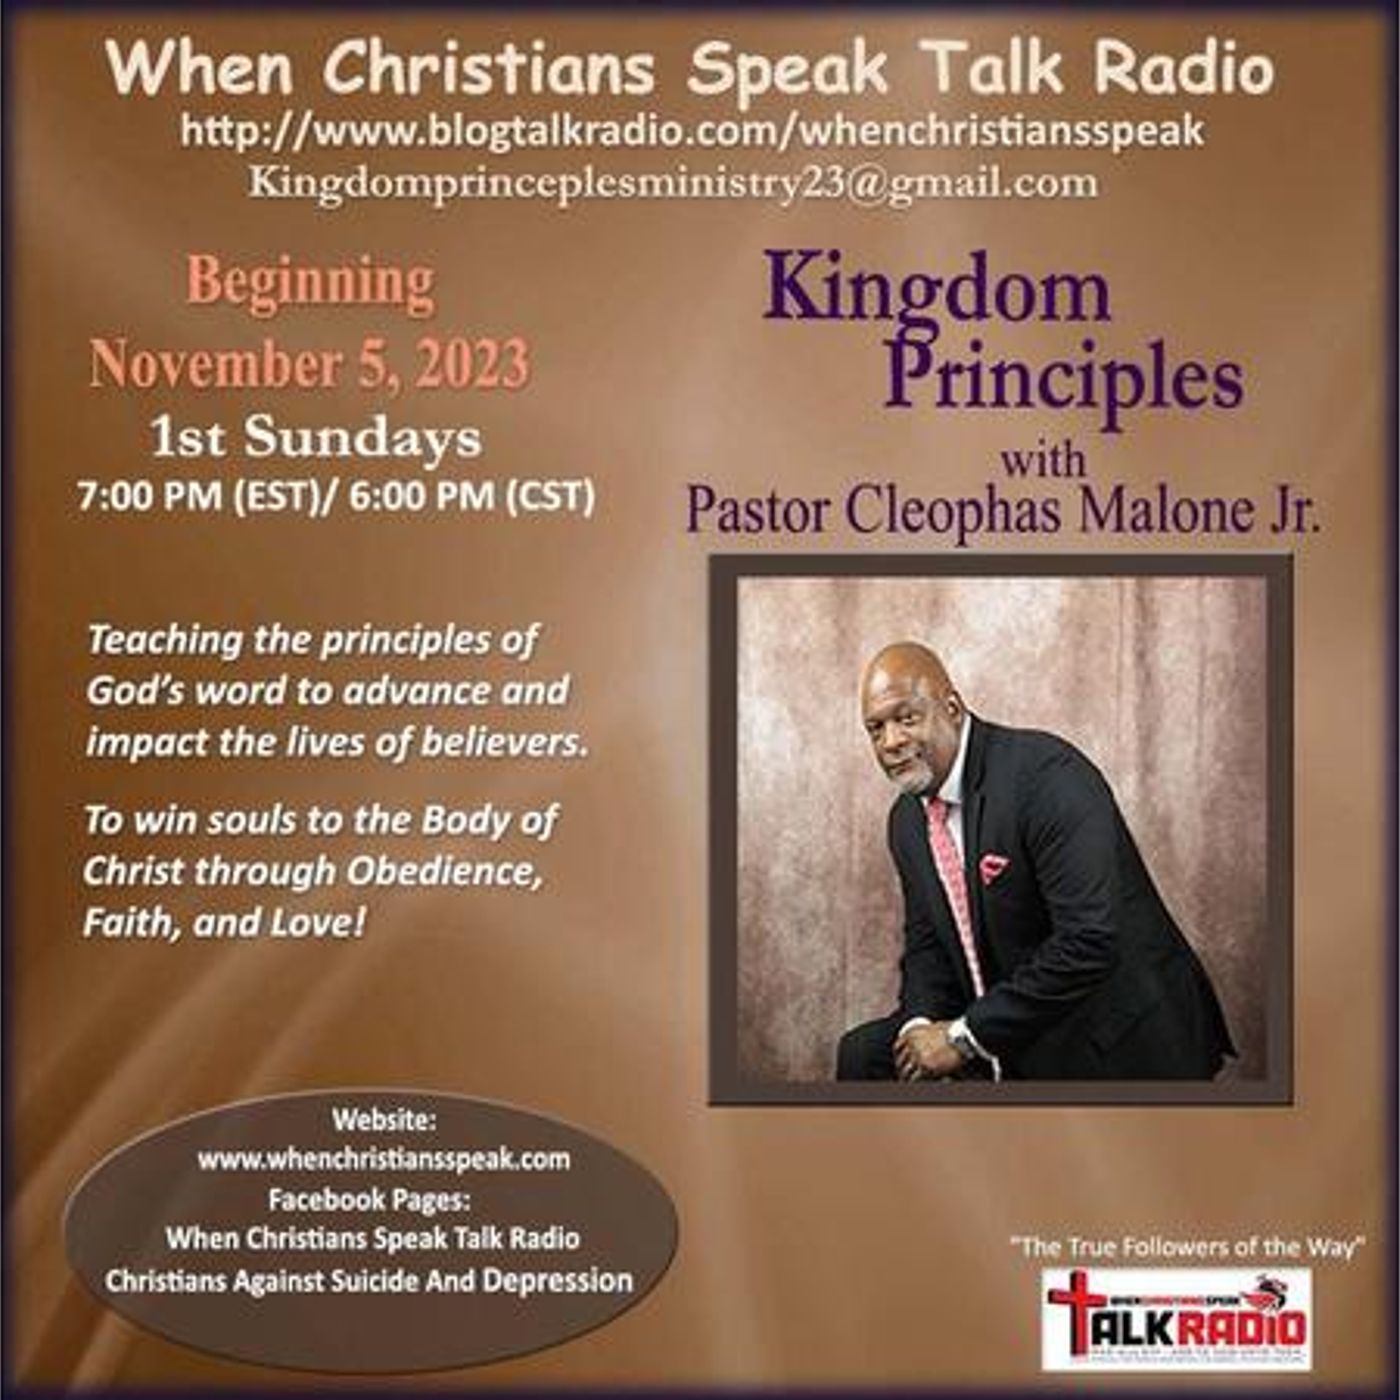 Kingdom Principles: Pastor Cleophas Malone Jr. A Divinely Aligned Thought Life!